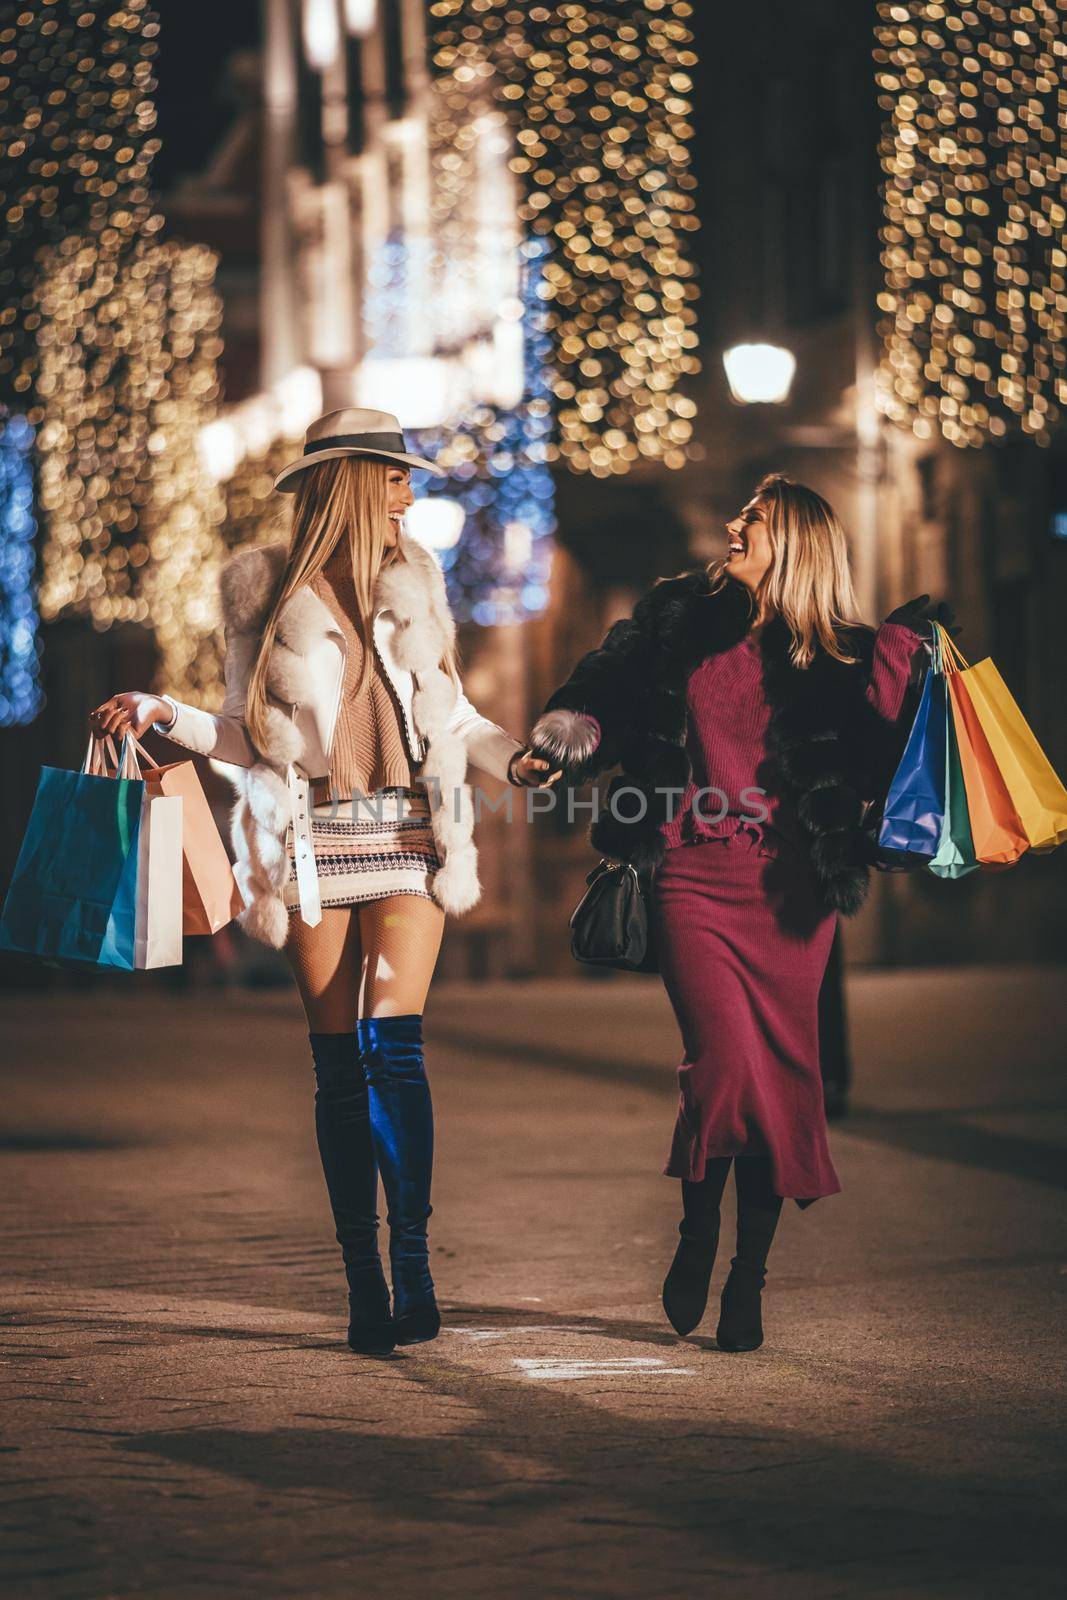 Cheerful Christmas Shopping by MilanMarkovic78